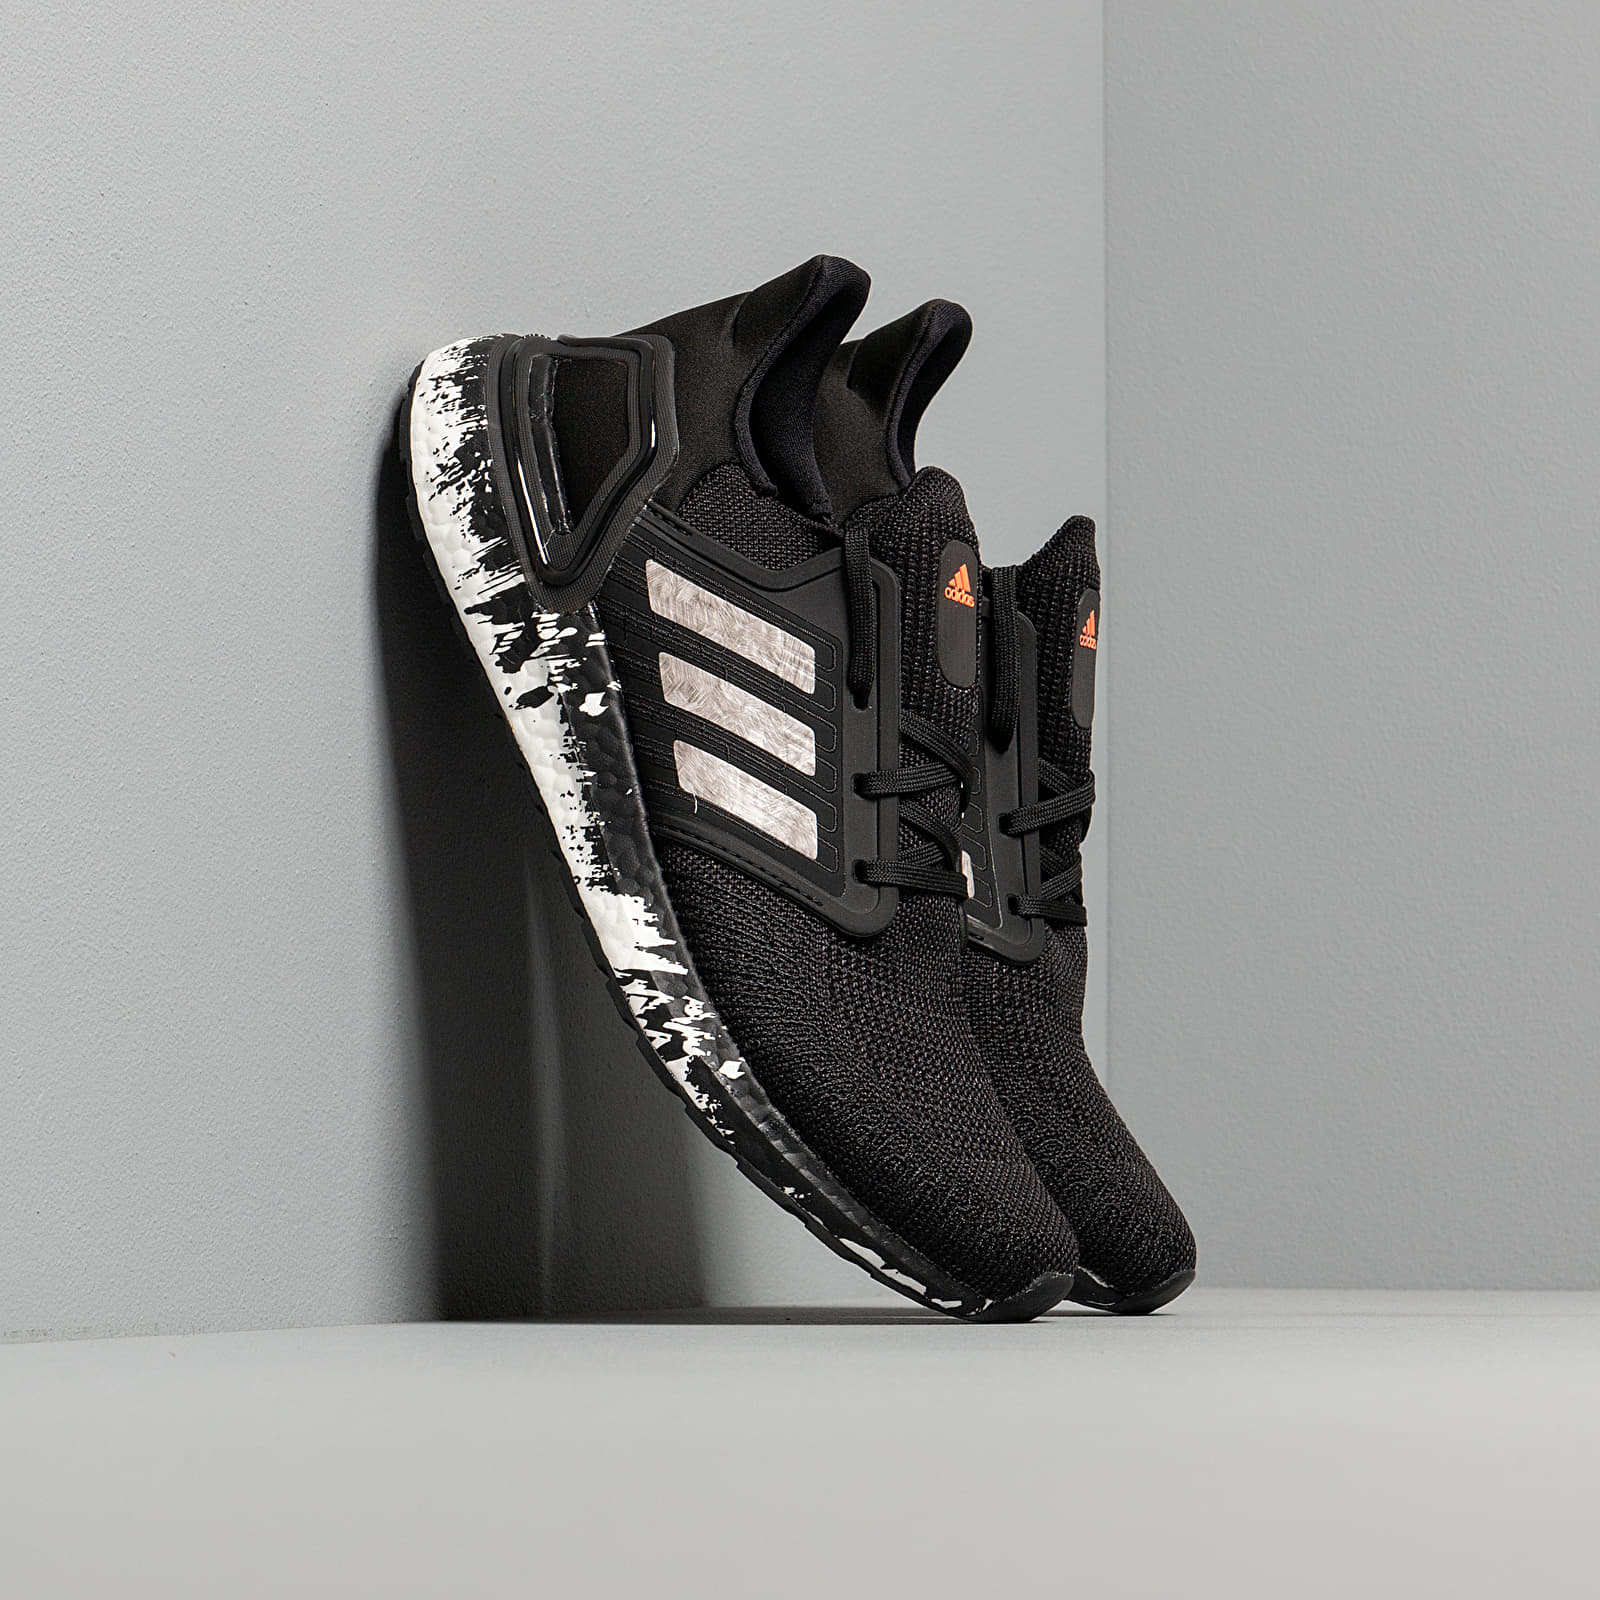 Chaussures et baskets homme adidas UltraBOOST 20 Core Black/ Ftw White/ Signature Coral